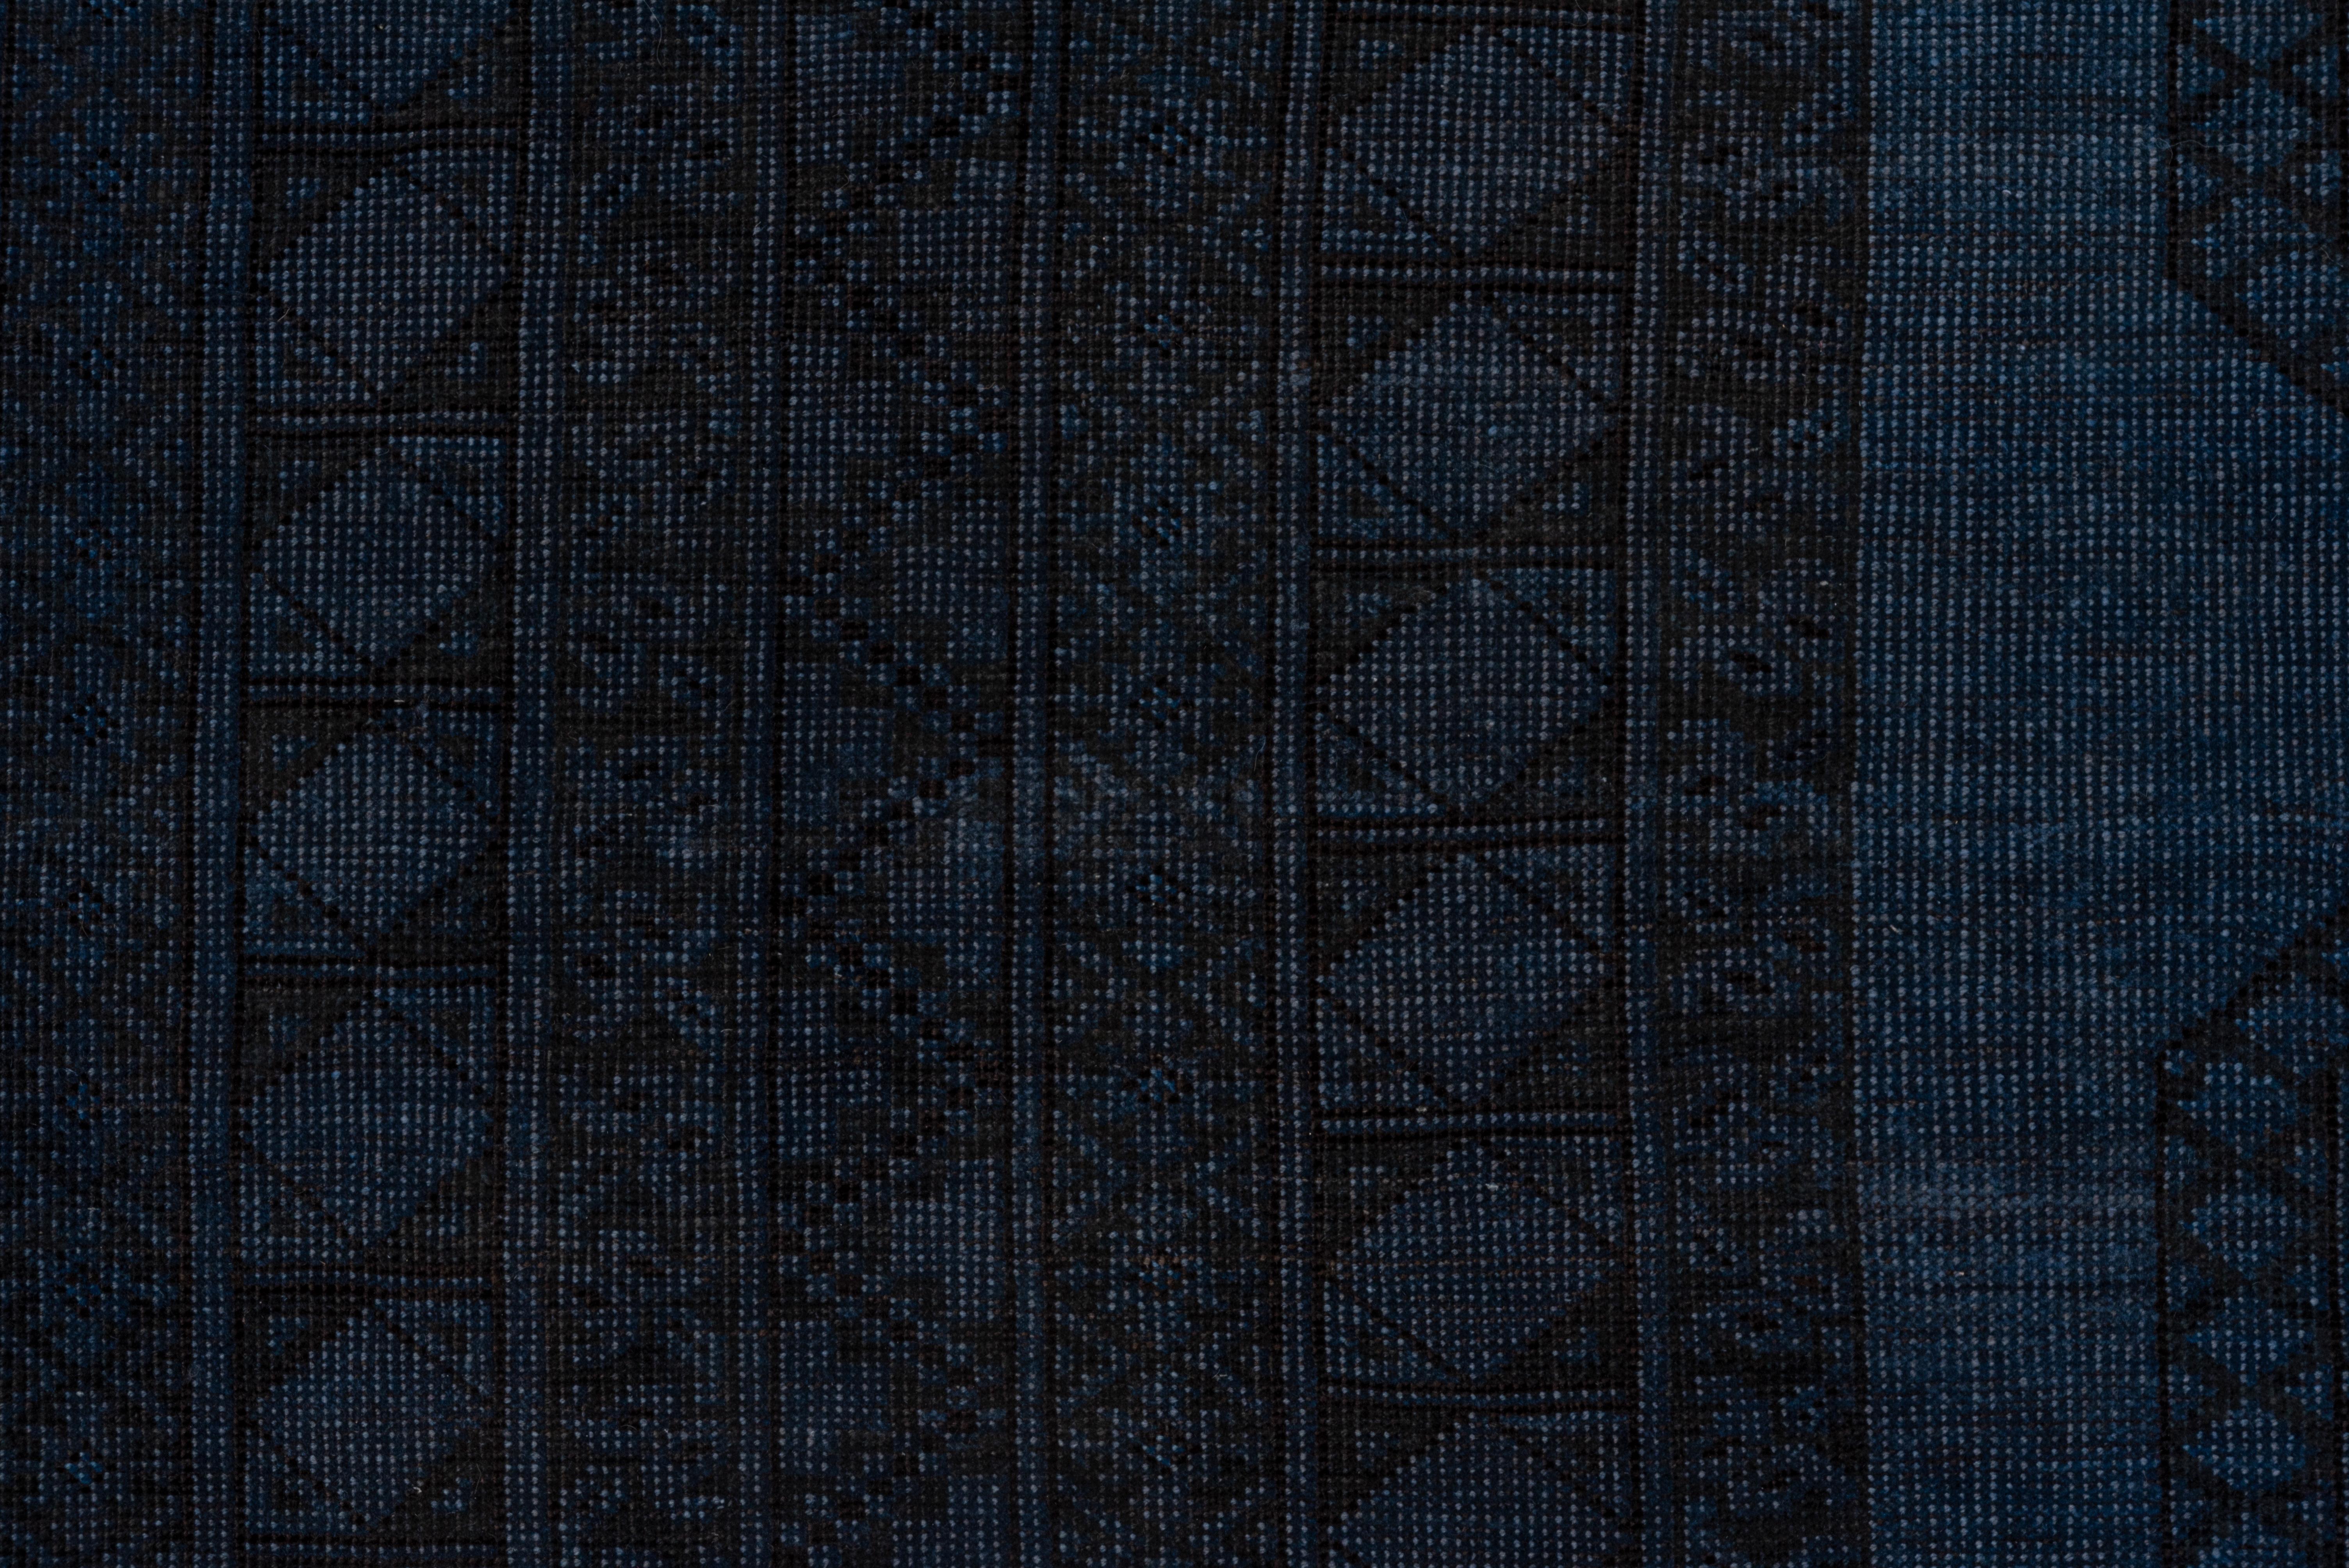 The underlying carpet is an Afghan-Ersari nomadic piece with a four by nine layout of tribal guls. It has been overdyed to give it a bluish overall tone.